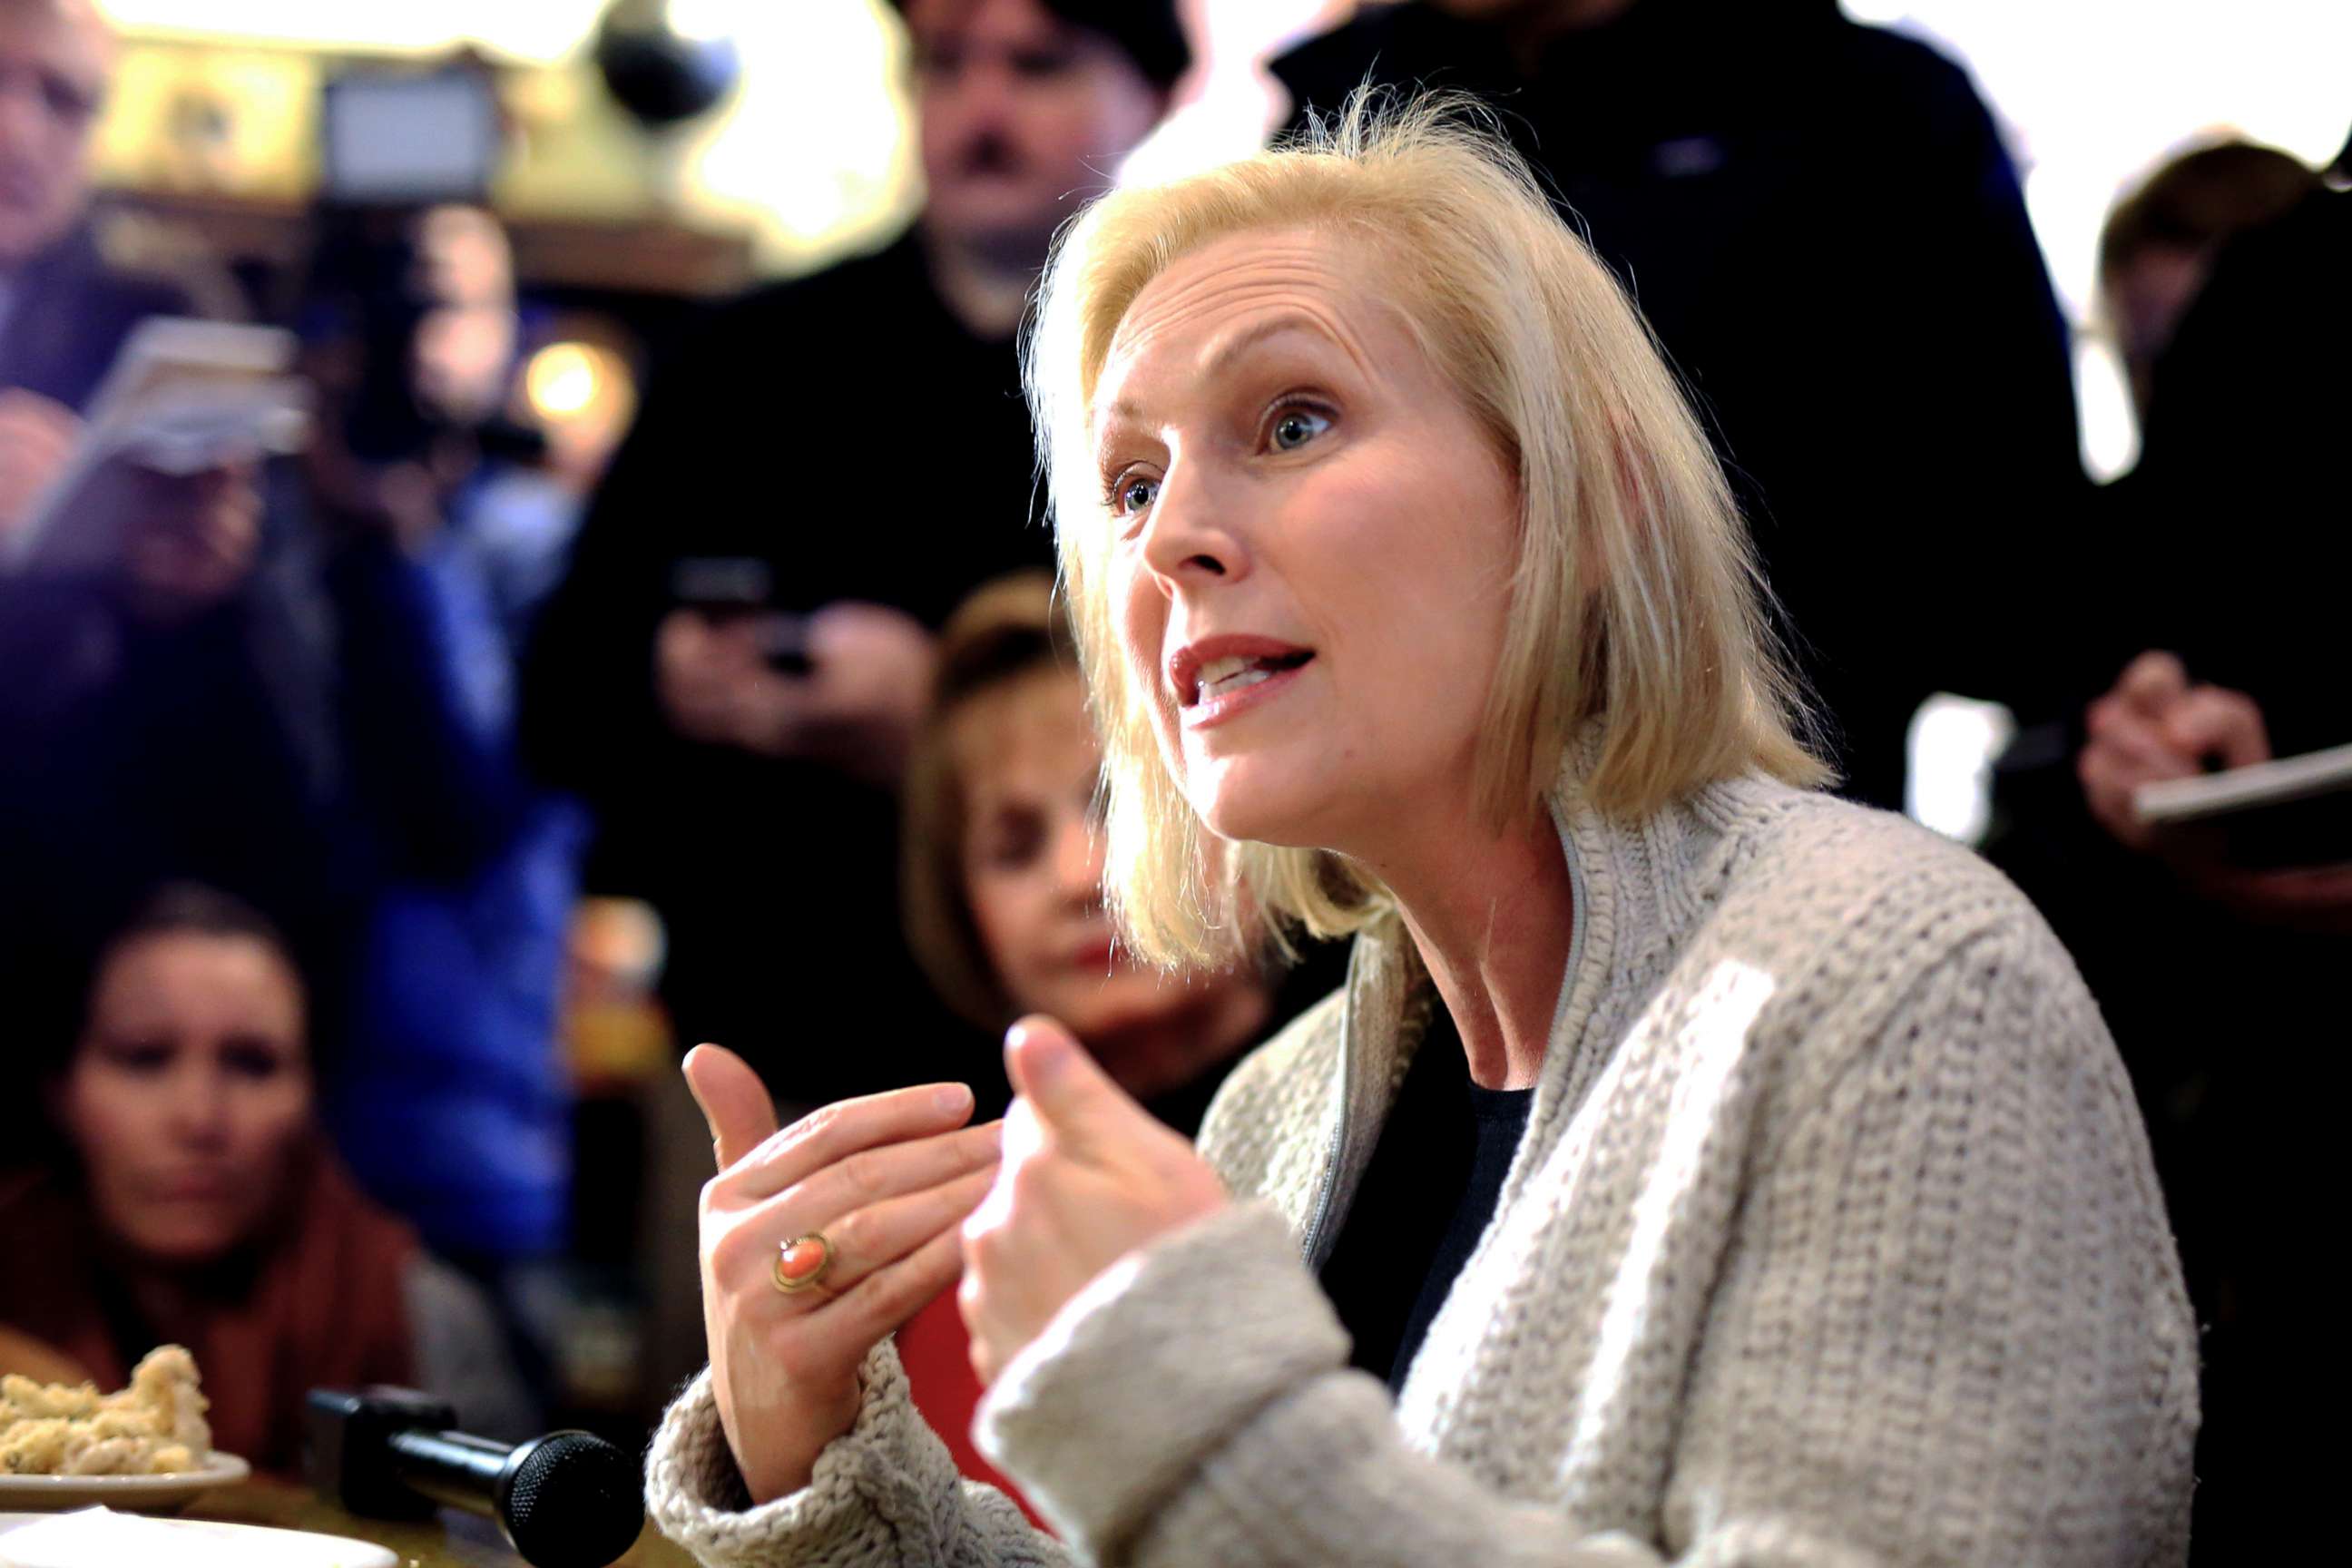 PHOTO: Sen. Kirsten Gillibrand meets with residents in Sioux City, Iowa, Jan. 18, 2019.